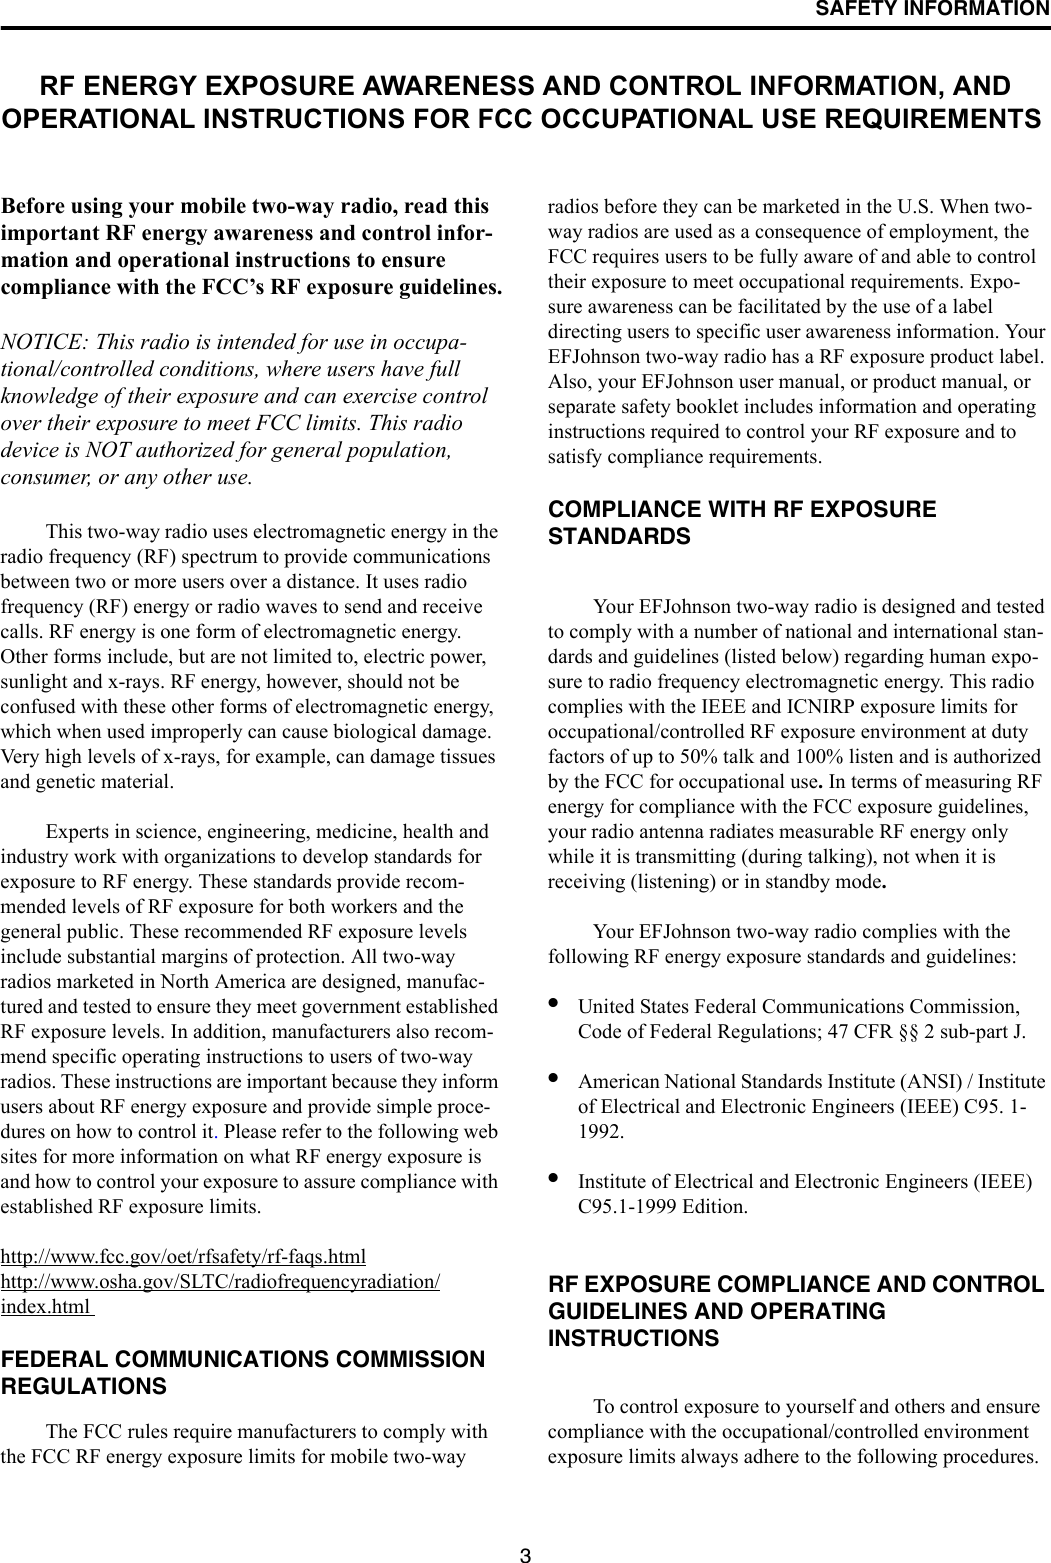 SAFETY INFORMATION3RF ENERGY EXPOSURE AWARENESS AND CONTROL INFORMATION, AND OPERATIONAL INSTRUCTIONS FOR FCC OCCUPATIONAL USE REQUIREMENTS Before using your mobile two-way radio, read this important RF energy awareness and control infor-mation and operational instructions to ensure compliance with the FCC’s RF exposure guidelines.NOTICE: This radio is intended for use in occupa-tional/controlled conditions, where users have full knowledge of their exposure and can exercise control over their exposure to meet FCC limits. This radio device is NOT authorized for general population, consumer, or any other use. This two-way radio uses electromagnetic energy in the radio frequency (RF) spectrum to provide communications between two or more users over a distance. It uses radio frequency (RF) energy or radio waves to send and receive calls. RF energy is one form of electromagnetic energy. Other forms include, but are not limited to, electric power, sunlight and x-rays. RF energy, however, should not be confused with these other forms of electromagnetic energy, which when used improperly can cause biological damage. Very high levels of x-rays, for example, can damage tissues and genetic material. Experts in science, engineering, medicine, health and industry work with organizations to develop standards for exposure to RF energy. These standards provide recom-mended levels of RF exposure for both workers and the general public. These recommended RF exposure levels include substantial margins of protection. All two-way radios marketed in North America are designed, manufac-tured and tested to ensure they meet government established RF exposure levels. In addition, manufacturers also recom-mend specific operating instructions to users of two-way radios. These instructions are important because they inform users about RF energy exposure and provide simple proce-dures on how to control it. Please refer to the following web sites for more information on what RF energy exposure is and how to control your exposure to assure compliance with established RF exposure limits. http://www.fcc.gov/oet/rfsafety/rf-faqs.htmlhttp://www.osha.gov/SLTC/radiofrequencyradiation/index.html FEDERAL COMMUNICATIONS COMMISSION REGULATIONS The FCC rules require manufacturers to comply with the FCC RF energy exposure limits for mobile two-way radios before they can be marketed in the U.S. When two-way radios are used as a consequence of employment, the FCC requires users to be fully aware of and able to control their exposure to meet occupational requirements. Expo-sure awareness can be facilitated by the use of a label directing users to specific user awareness information. Your EFJohnson two-way radio has a RF exposure product label. Also, your EFJohnson user manual, or product manual, or separate safety booklet includes information and operating instructions required to control your RF exposure and to satisfy compliance requirements. COMPLIANCE WITH RF EXPOSURE STANDARDS Your EFJohnson two-way radio is designed and tested to comply with a number of national and international stan-dards and guidelines (listed below) regarding human expo-sure to radio frequency electromagnetic energy. This radio complies with the IEEE and ICNIRP exposure limits for occupational/controlled RF exposure environment at duty factors of up to 50% talk and 100% listen and is authorized by the FCC for occupational use. In terms of measuring RF energy for compliance with the FCC exposure guidelines, your radio antenna radiates measurable RF energy only while it is transmitting (during talking), not when it is receiving (listening) or in standby mode.Your EFJohnson two-way radio complies with the following RF energy exposure standards and guidelines: •United States Federal Communications Commission, Code of Federal Regulations; 47 CFR §§ 2 sub-part J. •American National Standards Institute (ANSI) / Institute of Electrical and Electronic Engineers (IEEE) C95. 1-1992. •Institute of Electrical and Electronic Engineers (IEEE) C95.1-1999 Edition. RF EXPOSURE COMPLIANCE AND CONTROL GUIDELINES AND OPERATINGINSTRUCTIONS To control exposure to yourself and others and ensure compliance with the occupational/controlled environment exposure limits always adhere to the following procedures. 